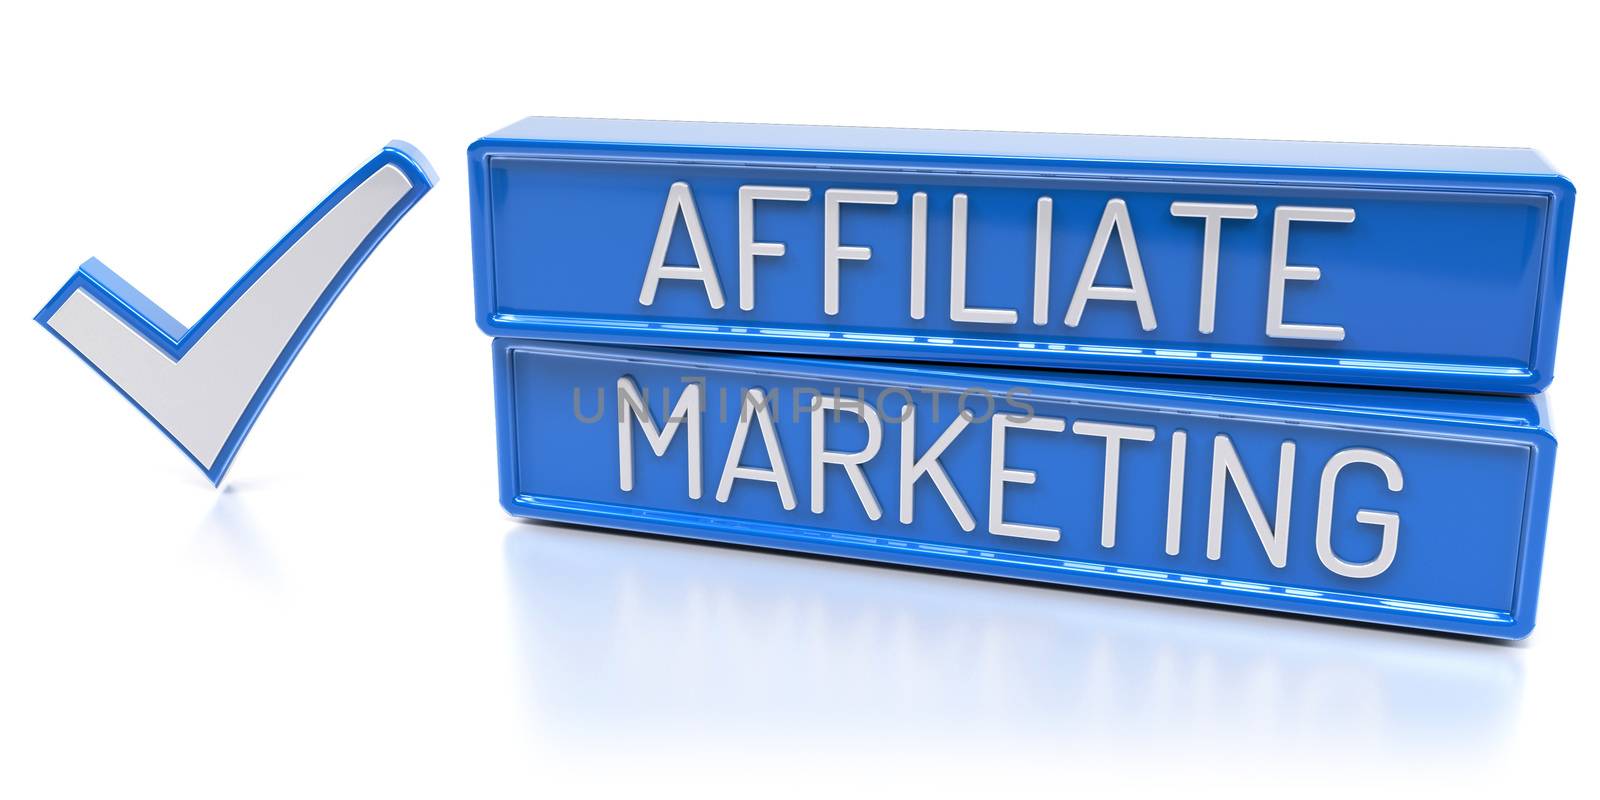 Affiliate Marketing - Blue banners with check mark - Isolated 3D Render